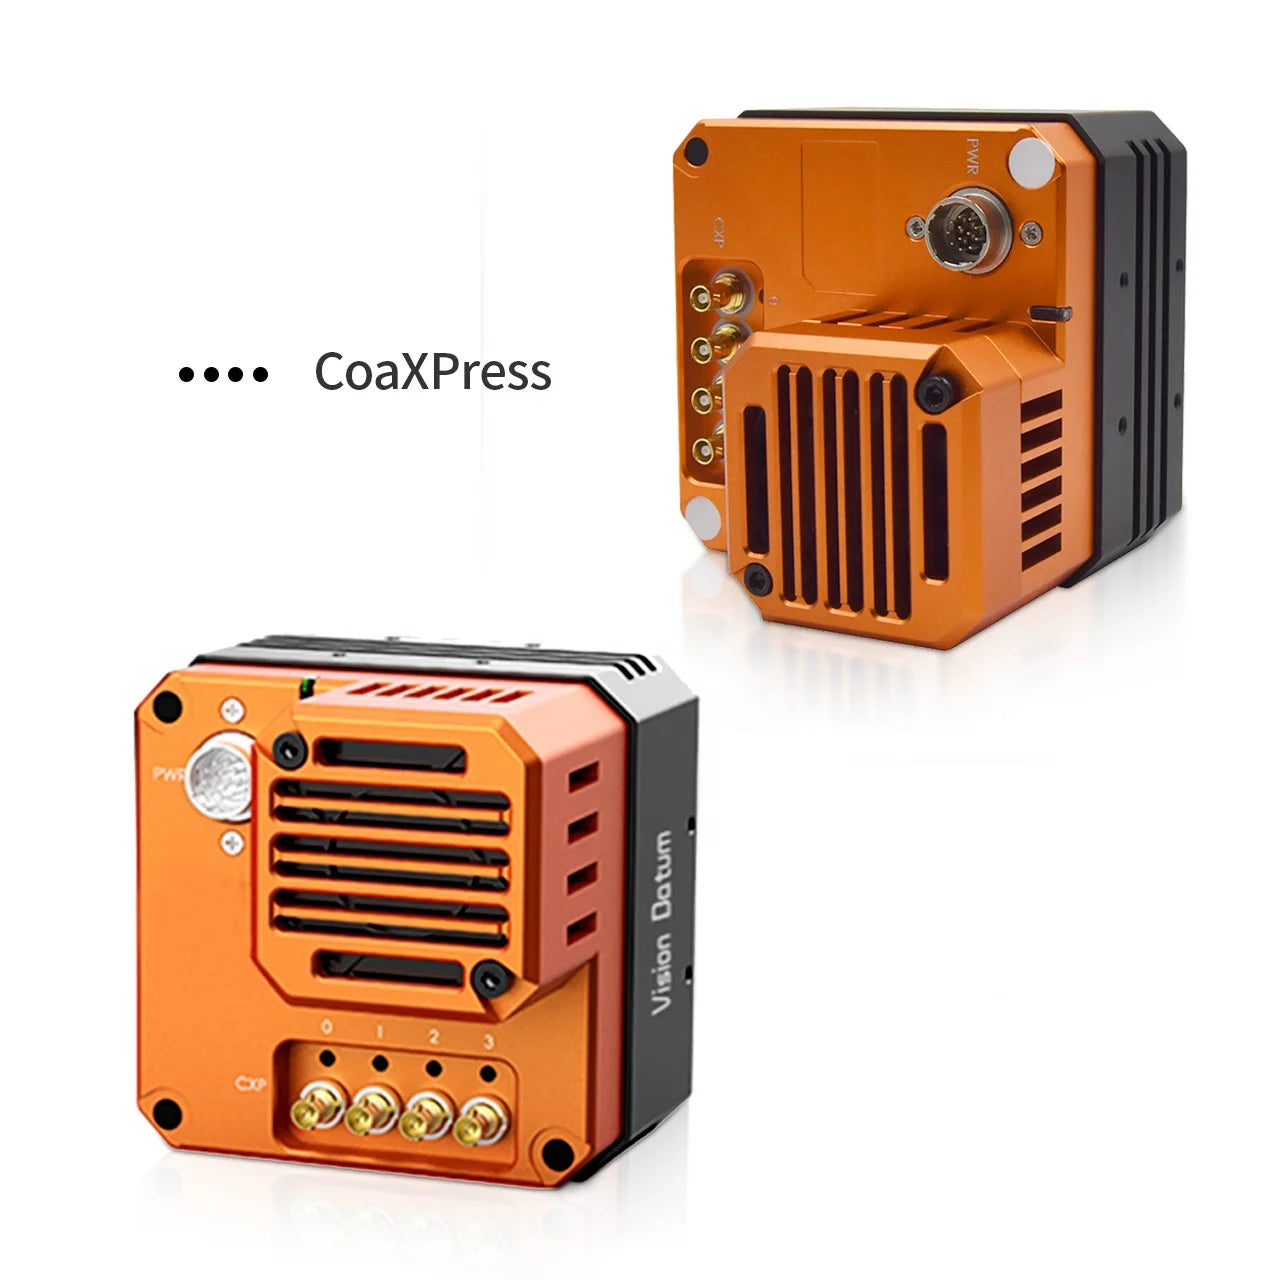 High Resolution 65MP 71FPS Gpixel GMAX3265 CoaXpress Camera for PCB Inspection